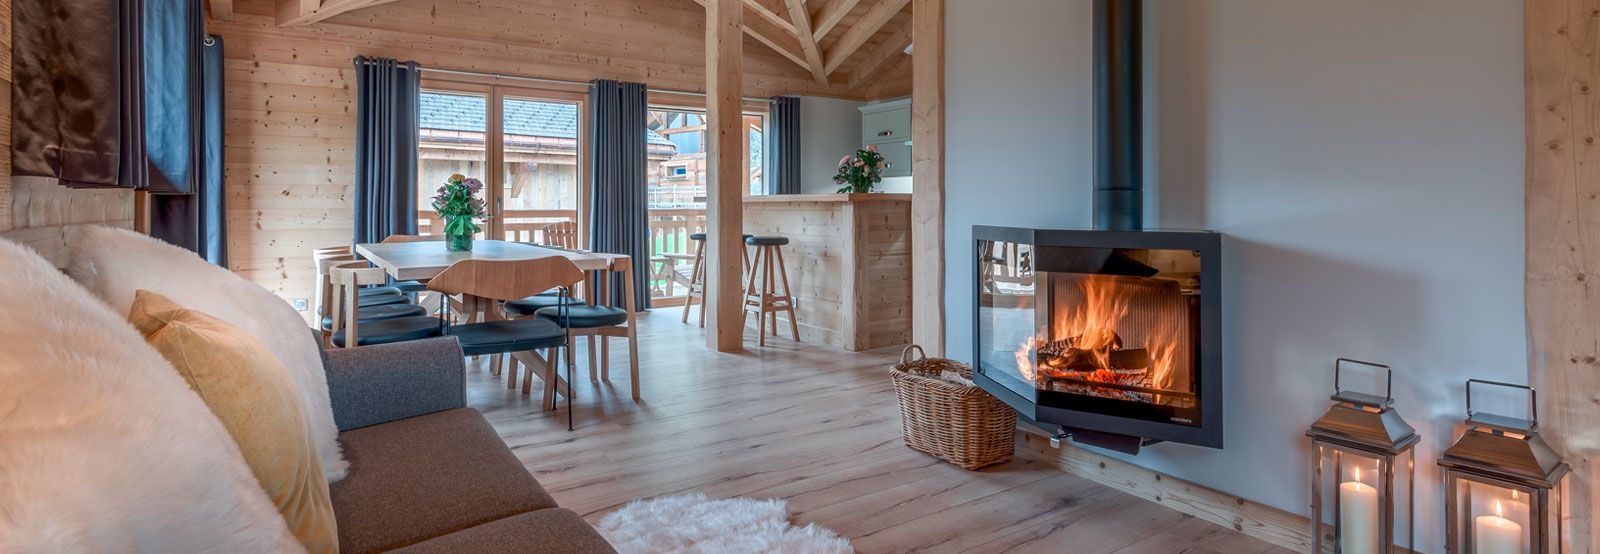 Self Catered Ski Chalets